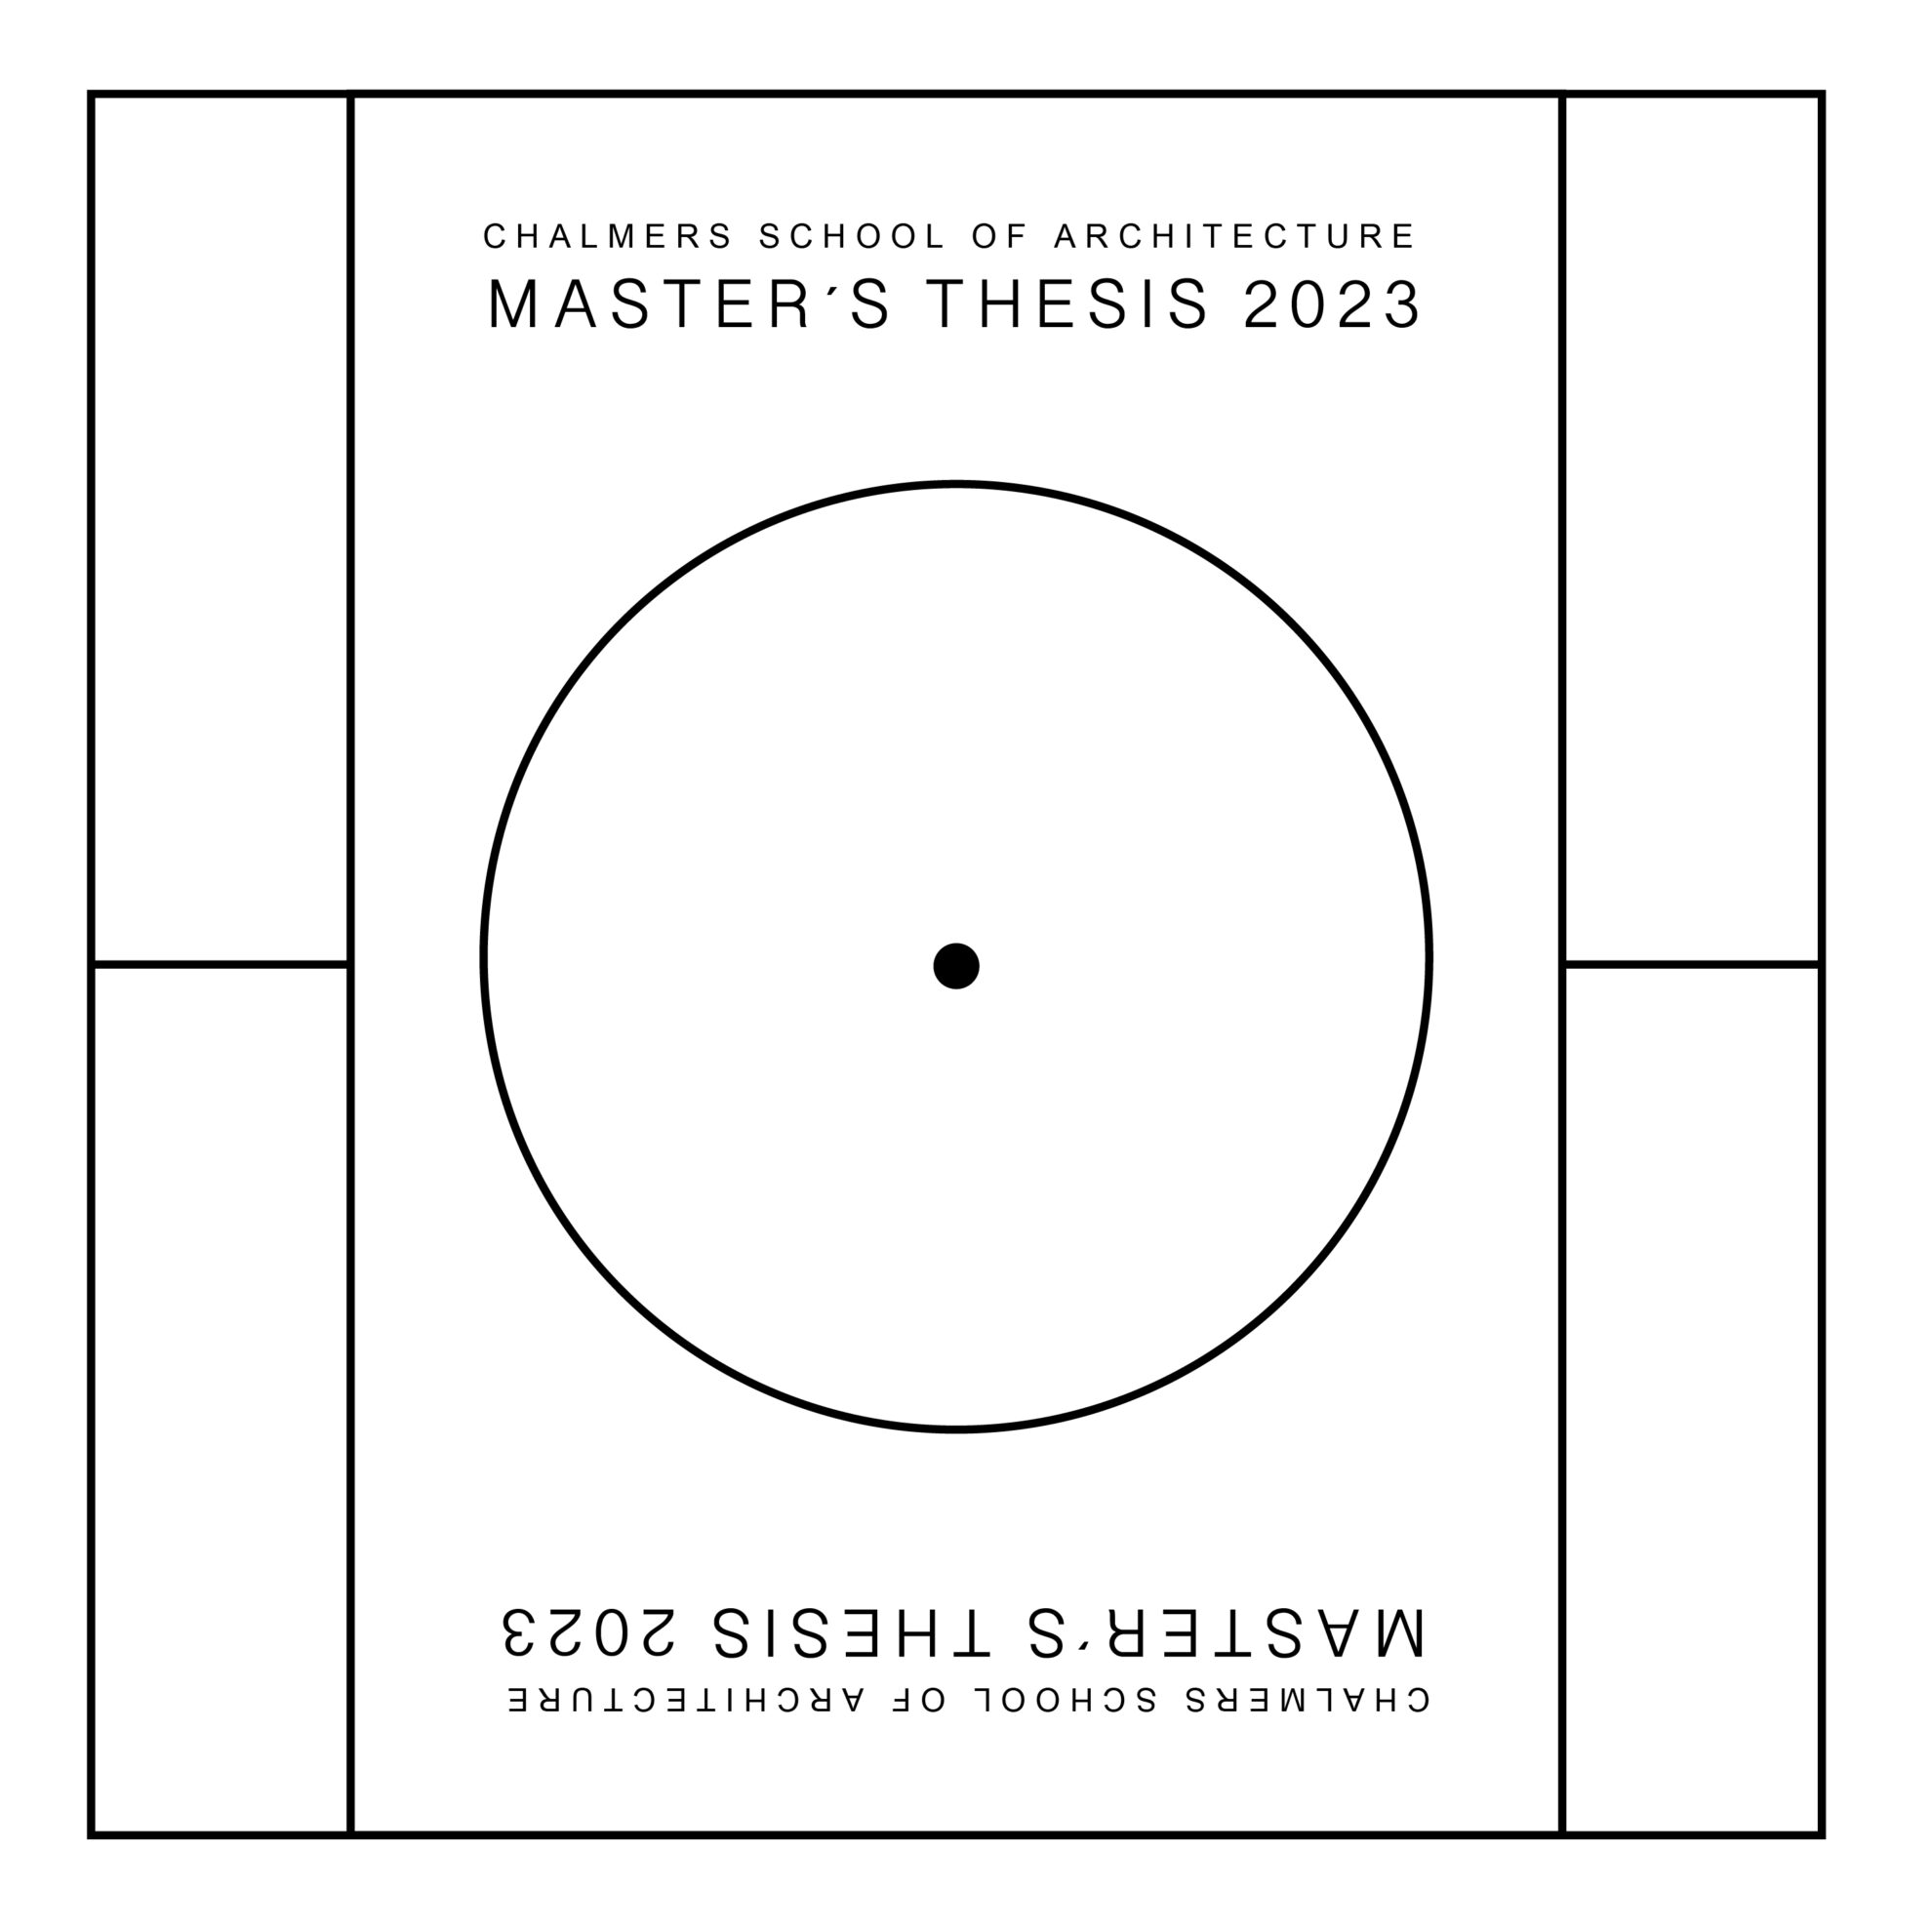 master thesis database chalmers